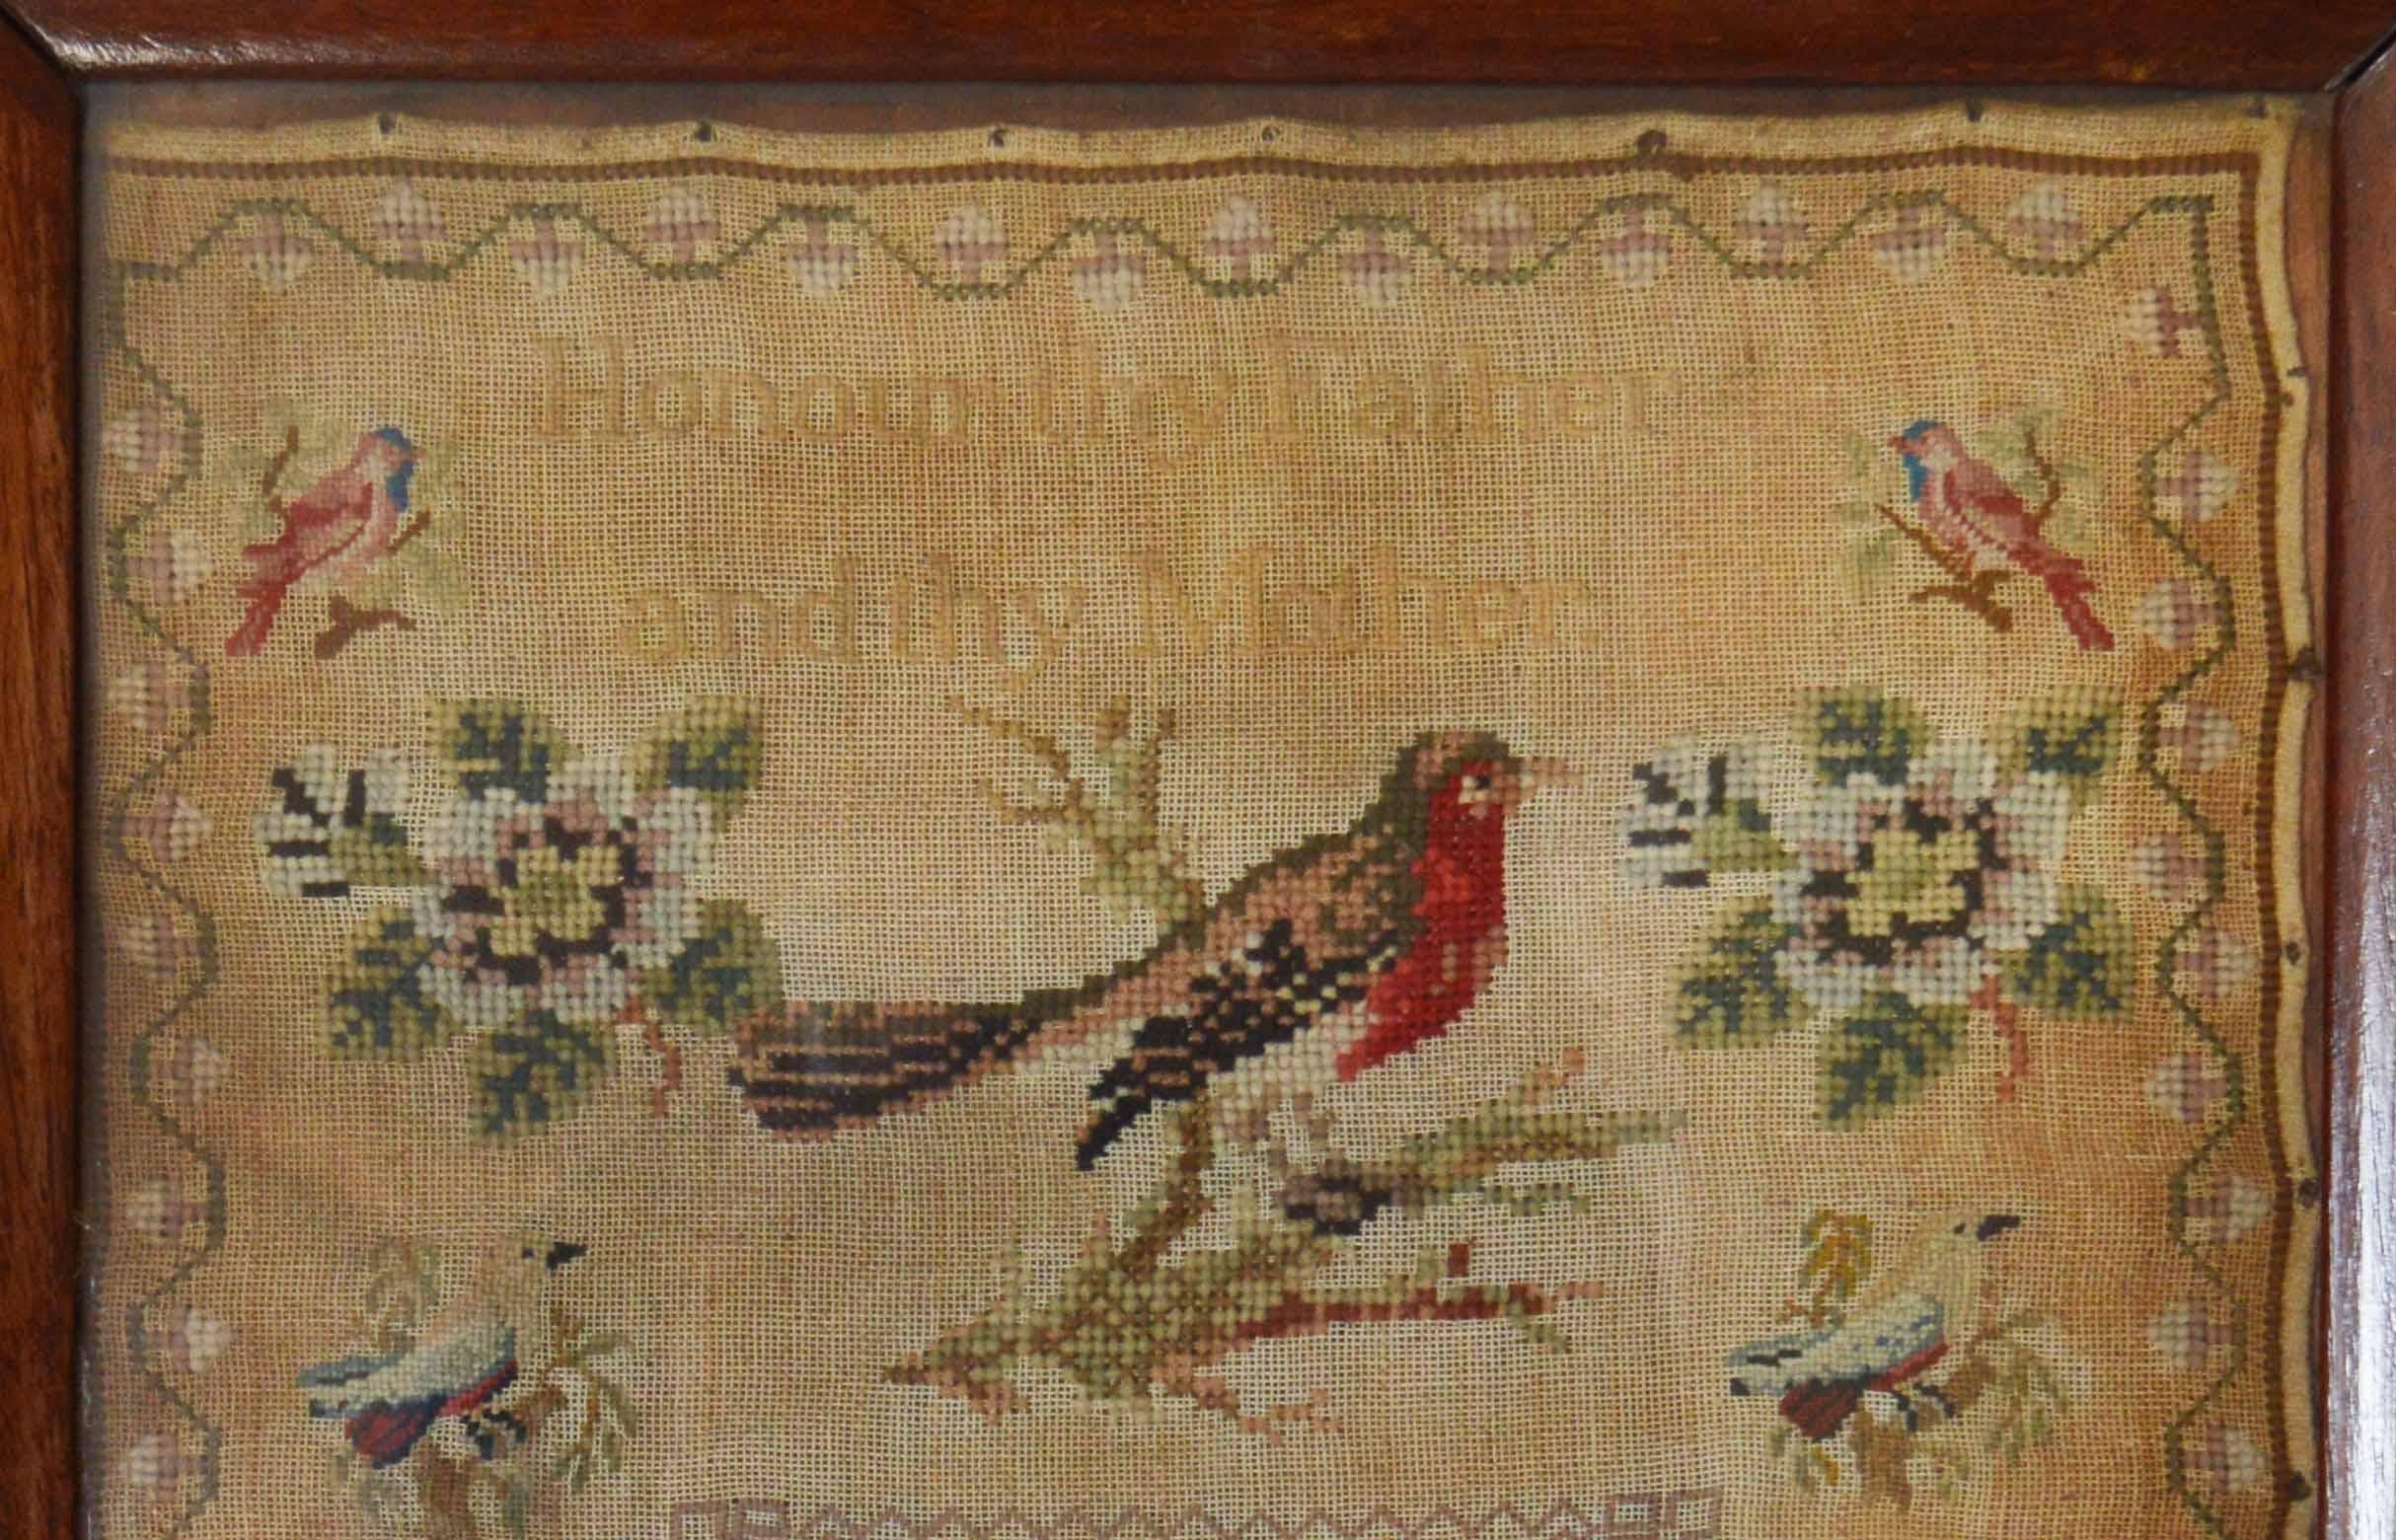 Embroidered Antique Welsh Sampler with a Cat, Anne Evans, 1853